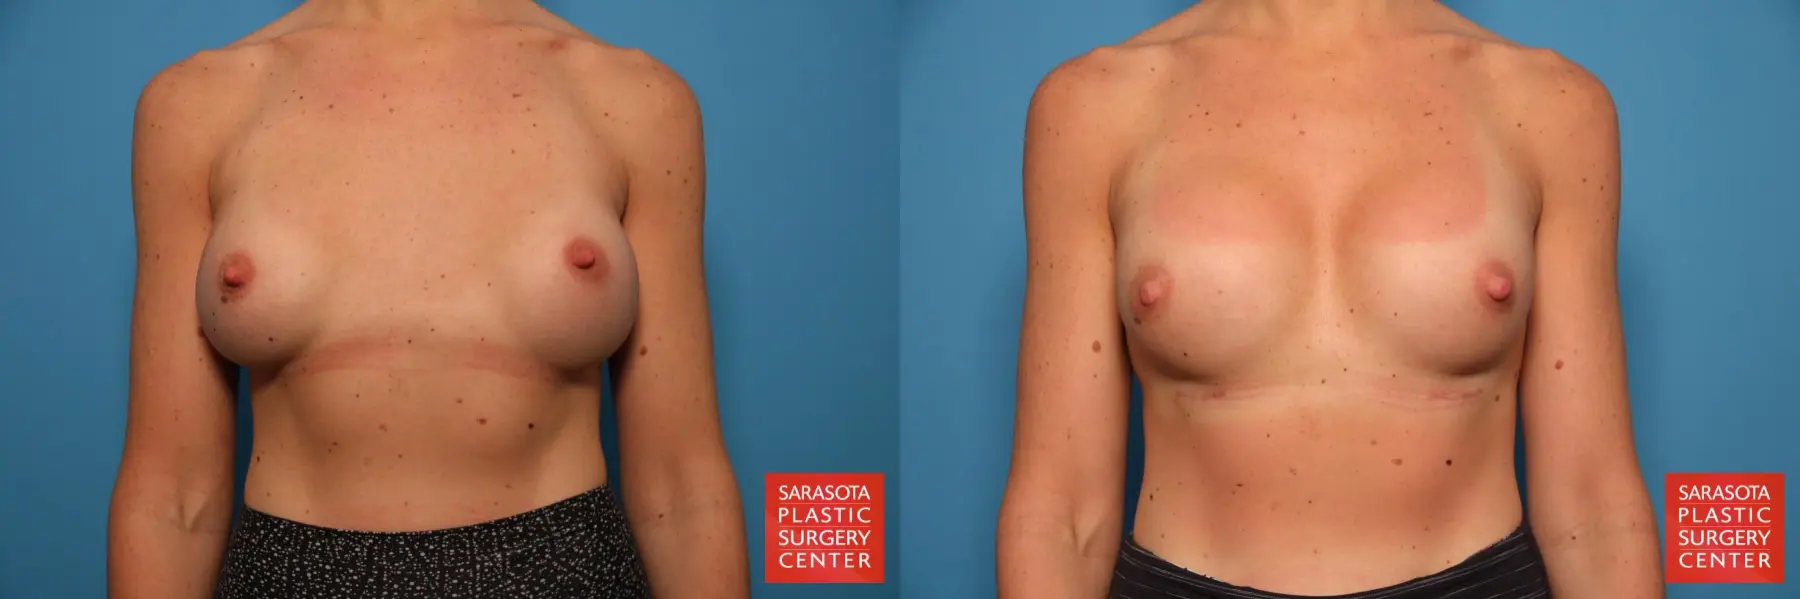 Breast Implant Removal/Replacement W/Mesh: Patient 1 - Before and After  